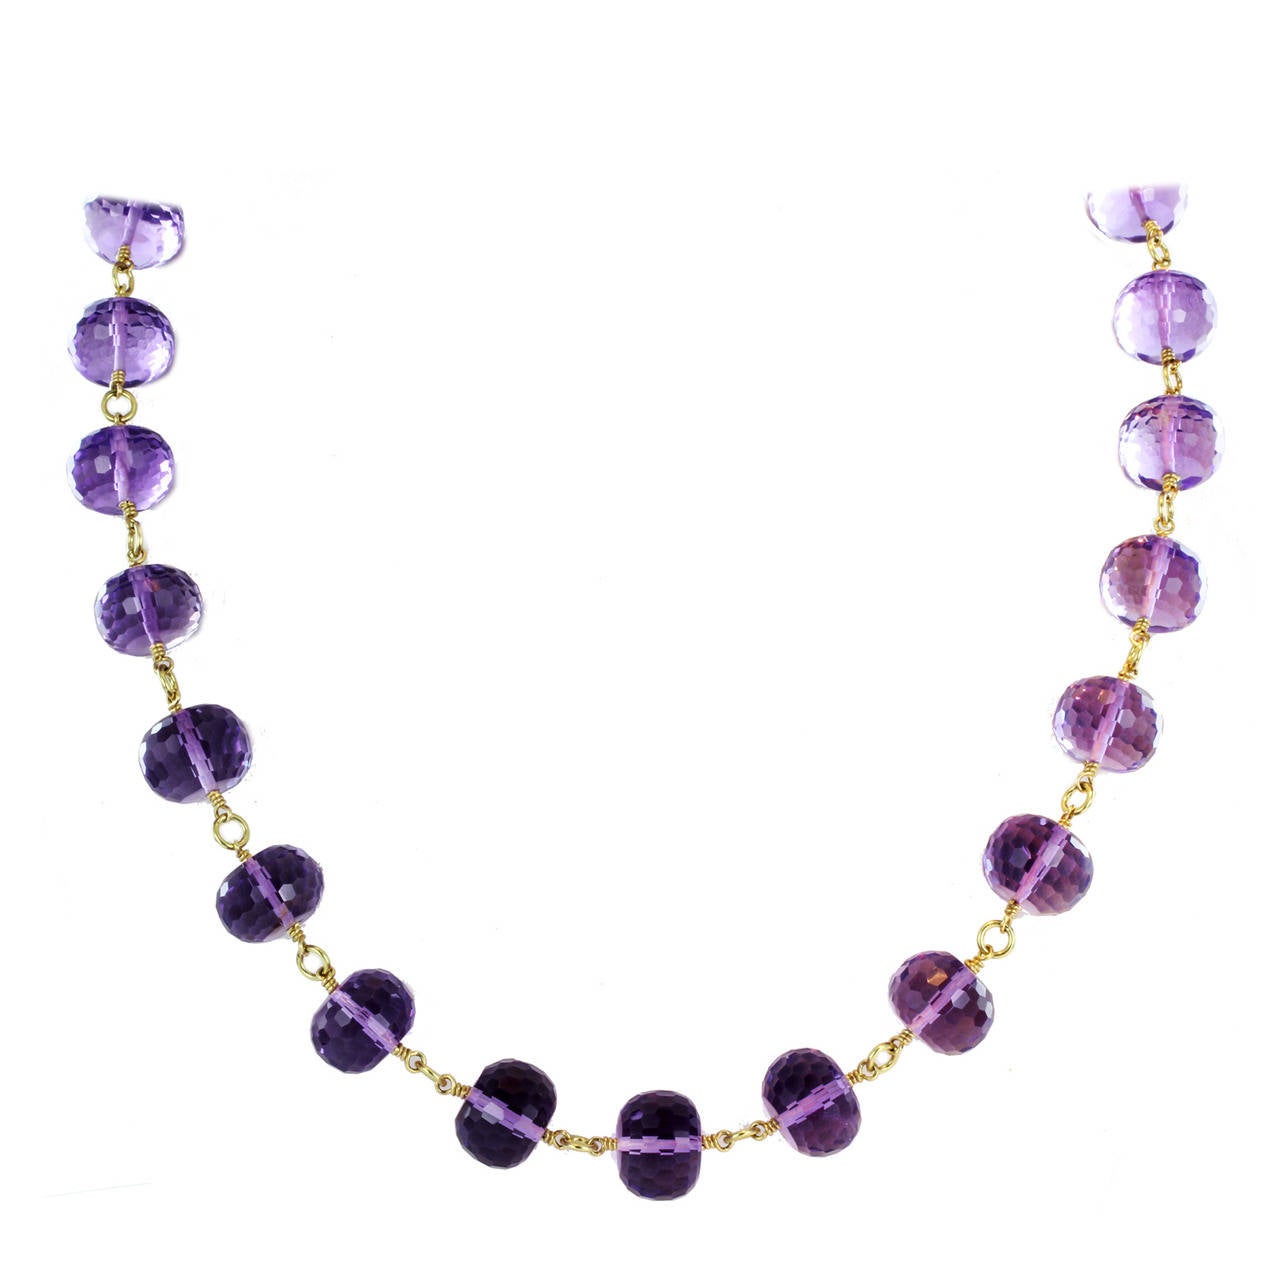 Amethyst Bead and Gold Necklace